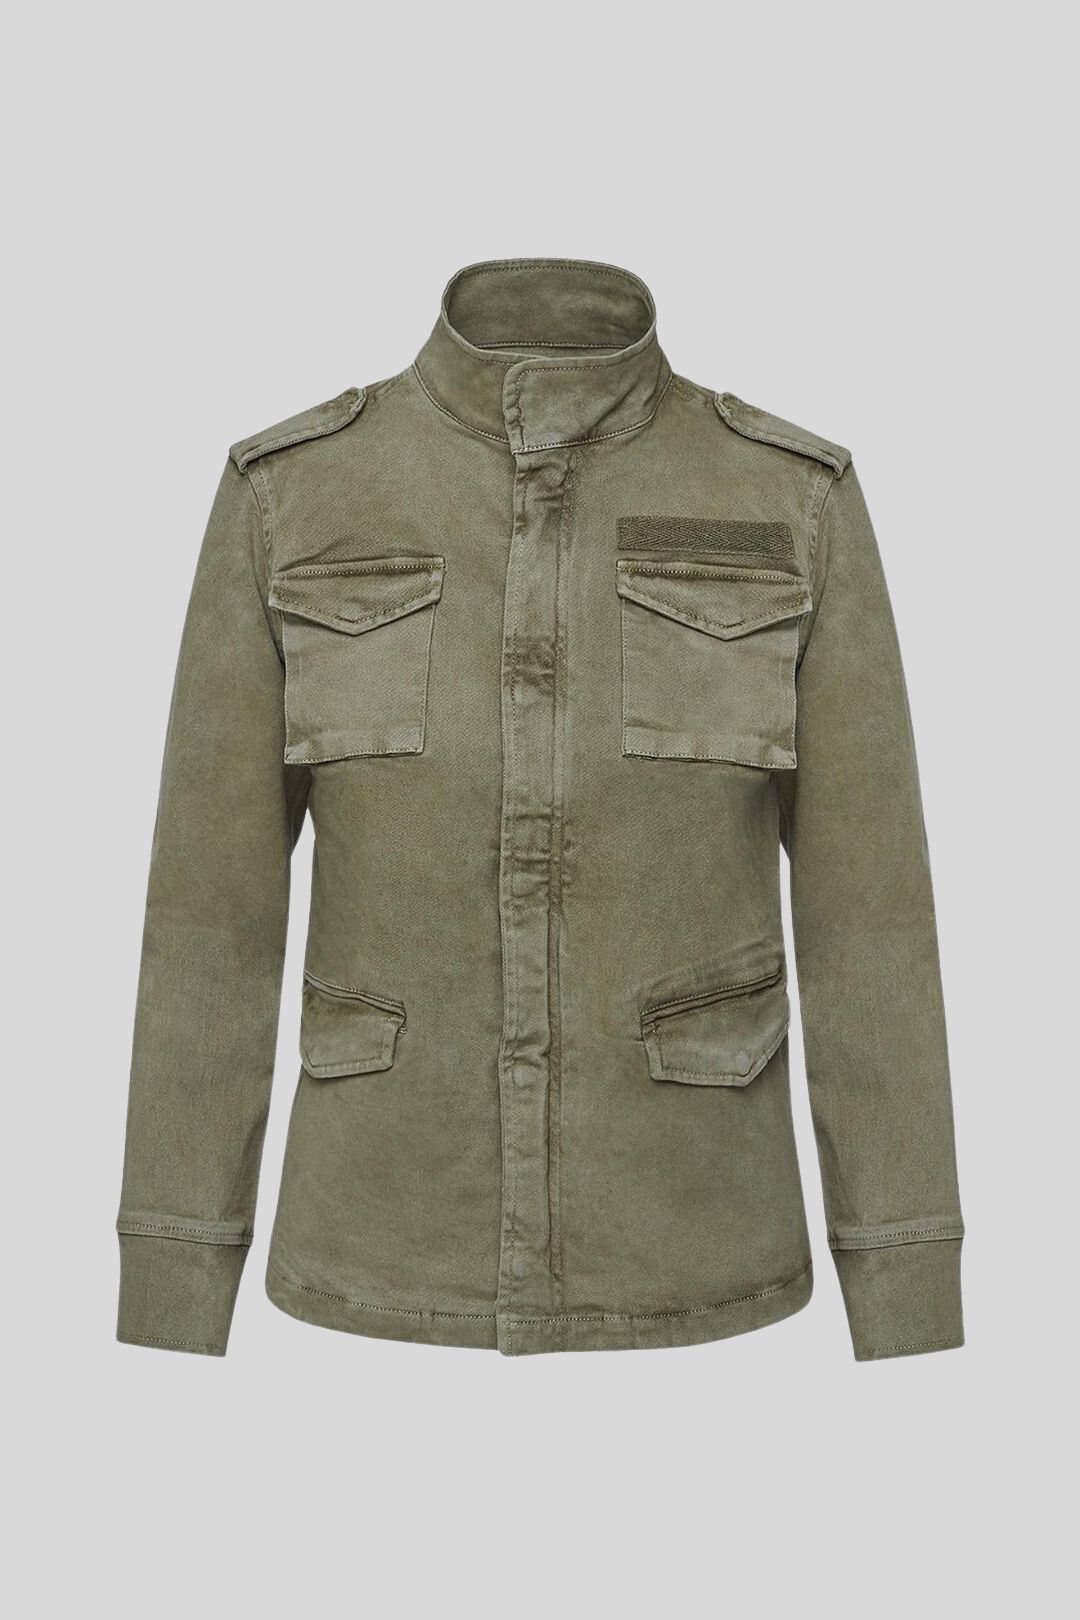 Anine Bing Army Jacket in Military Green